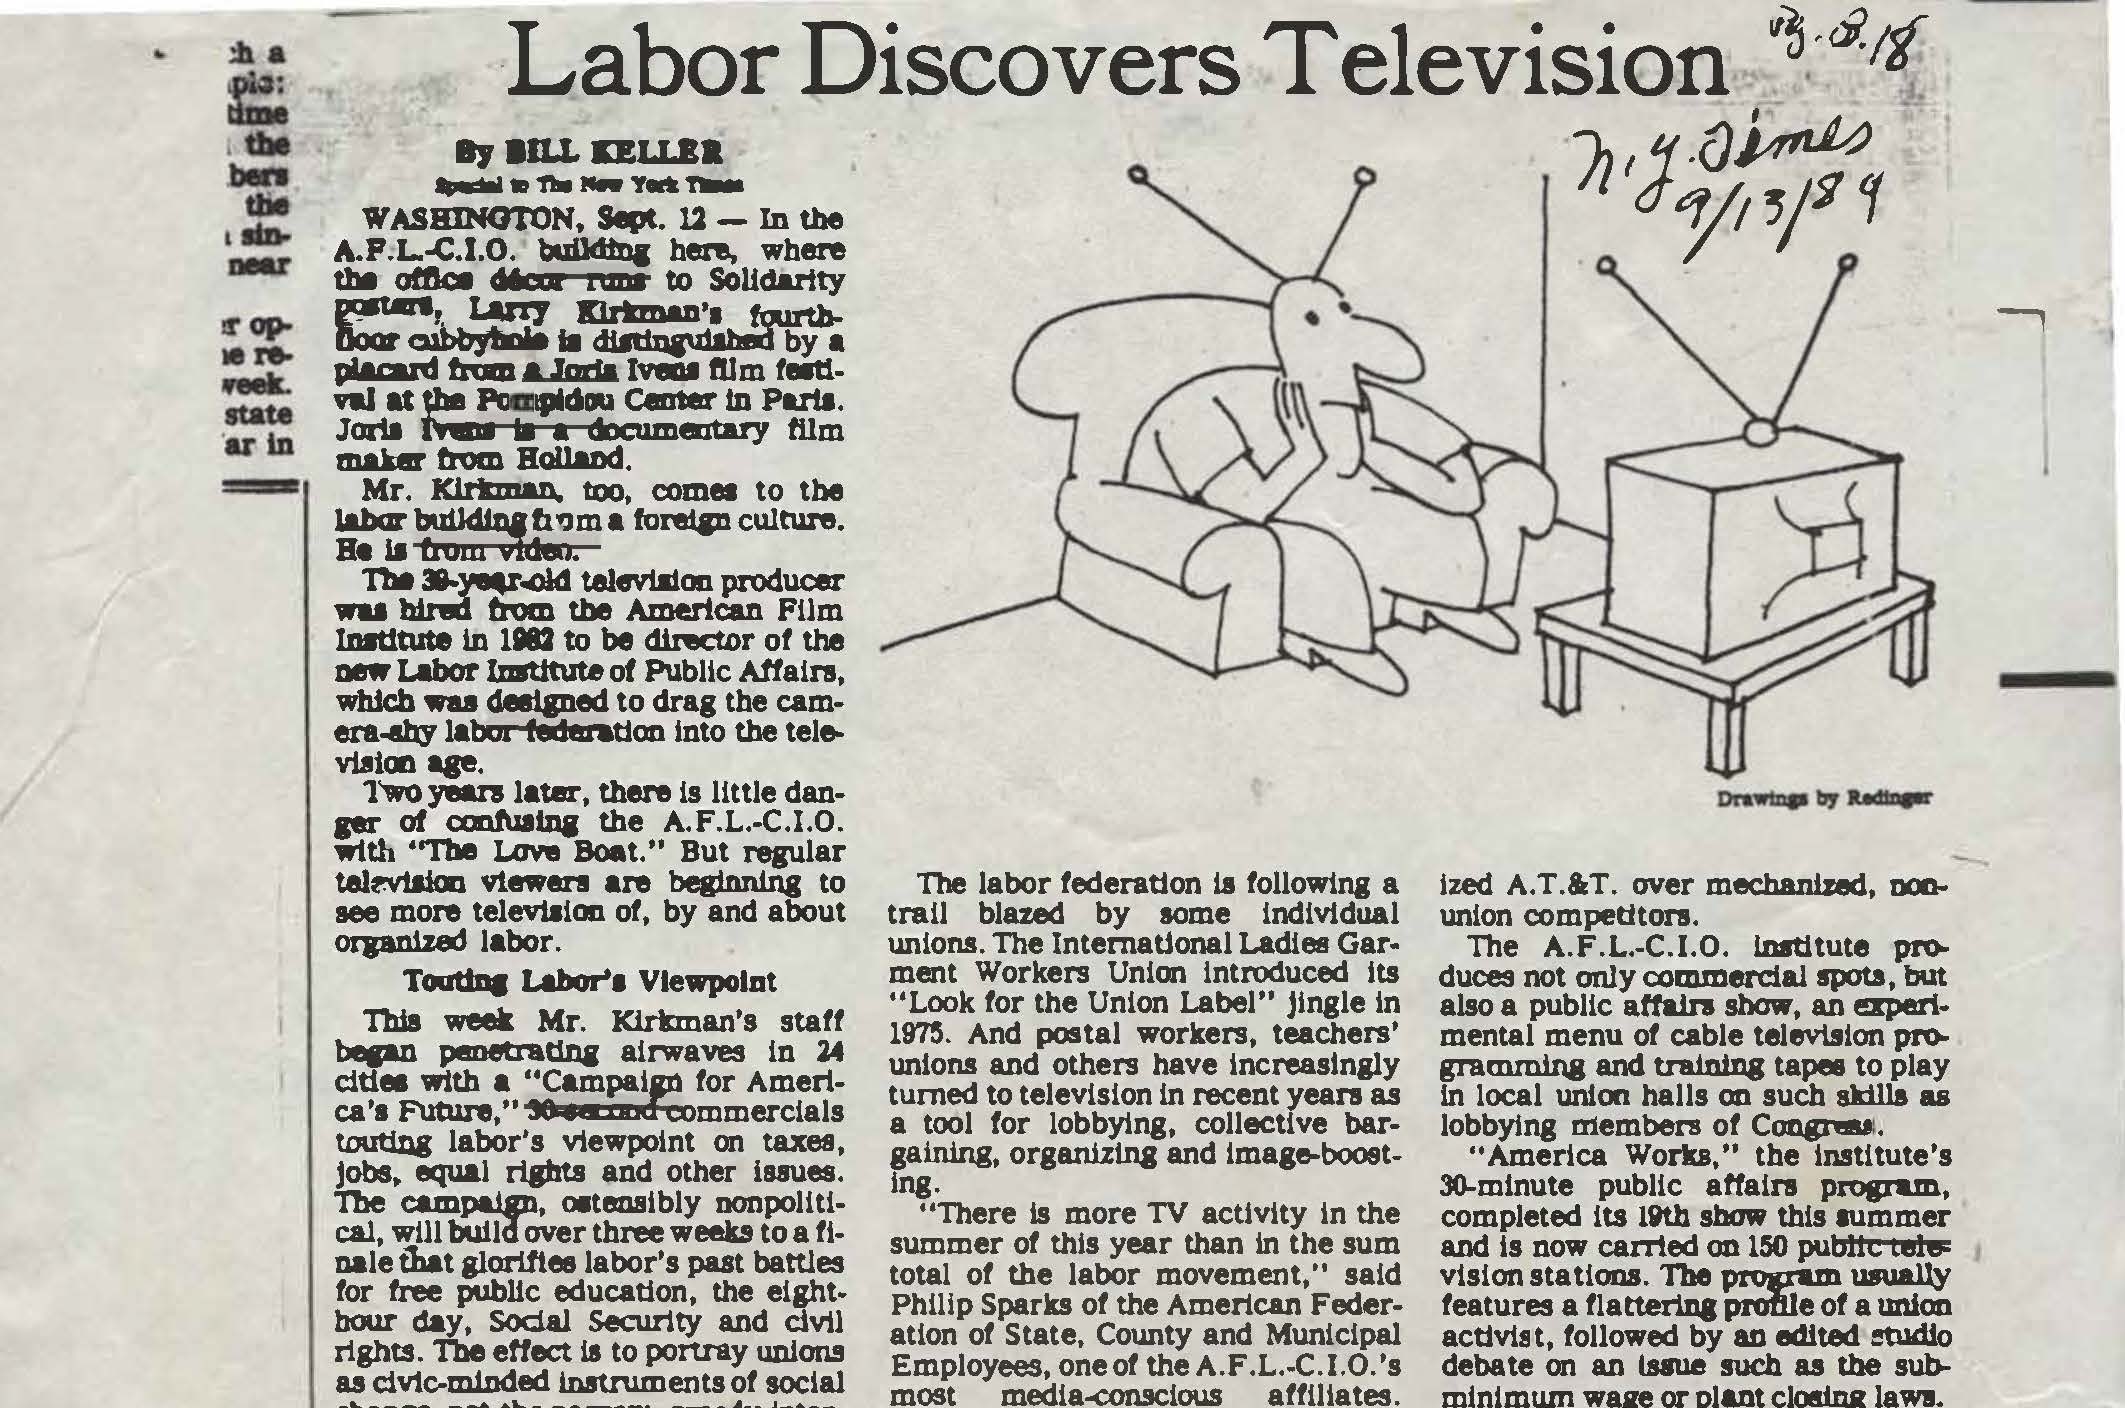 Labor Discovers Television New York Times Bill Keller article on Larry Kirkman at Labor Institute of Public Affairs AFL-CIO